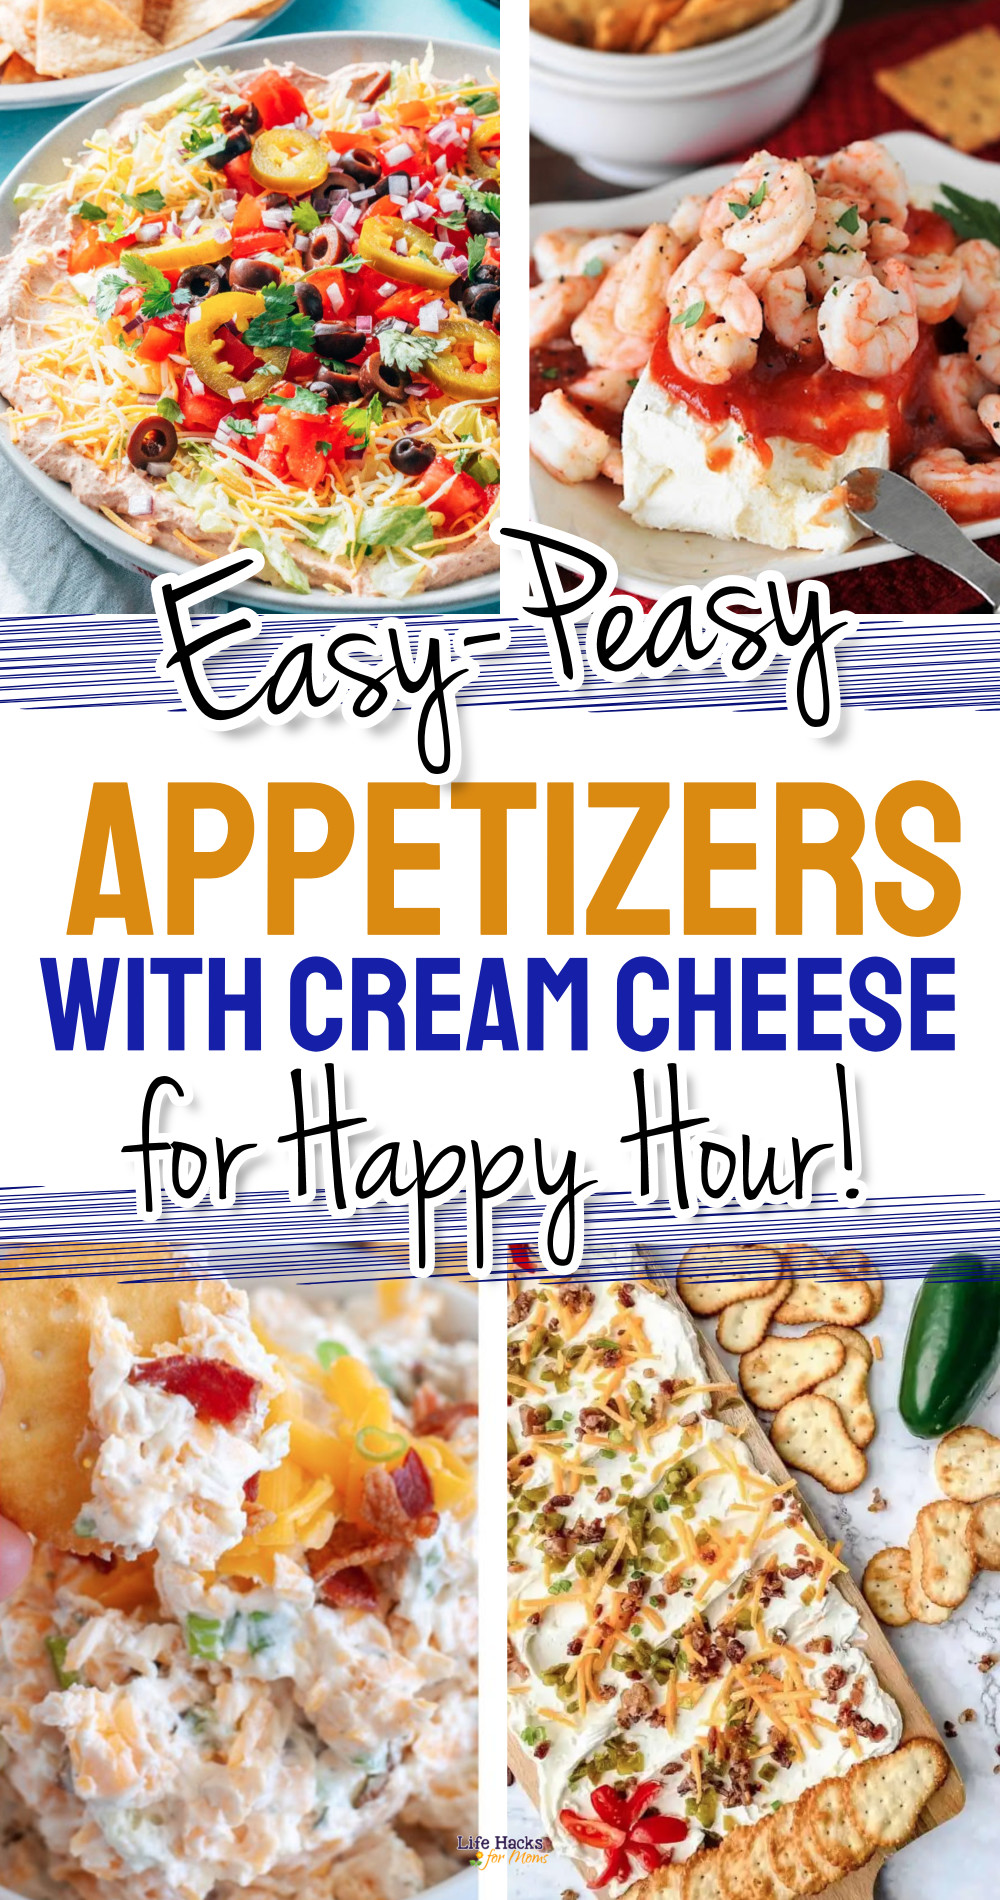 4 appetizers with cream cheese